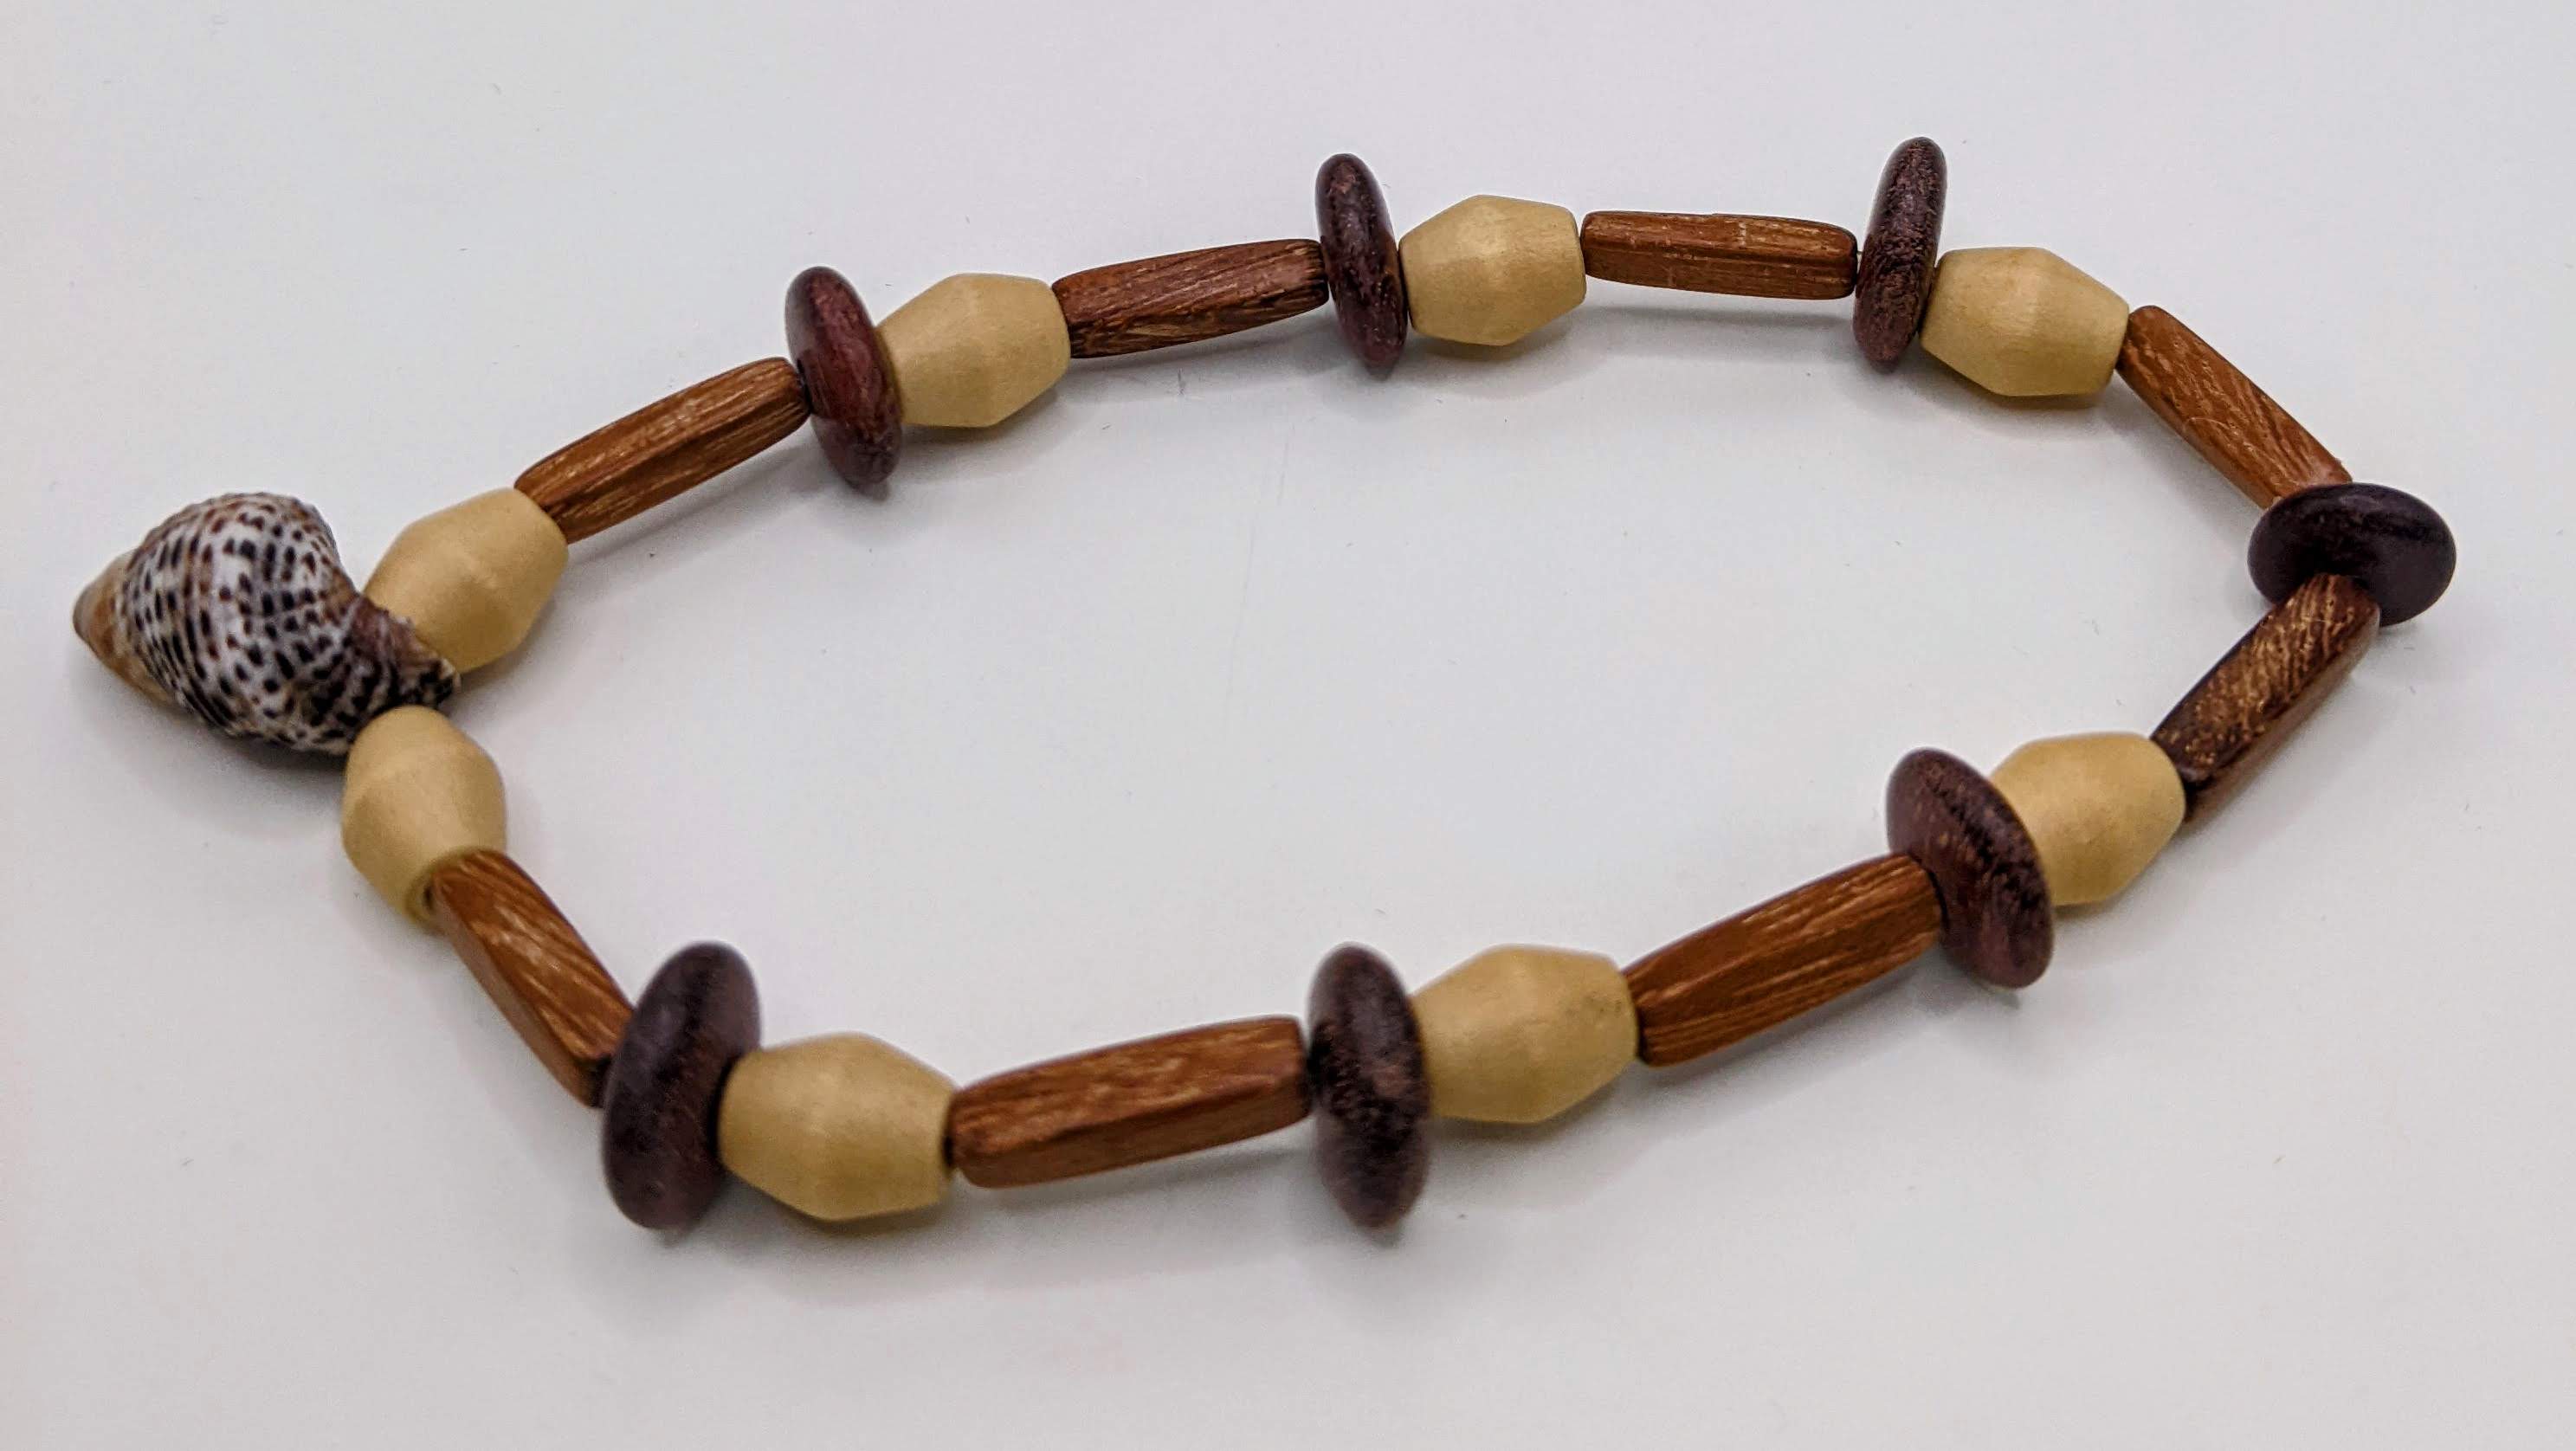 Periwinkle shell and wood beads bracelet